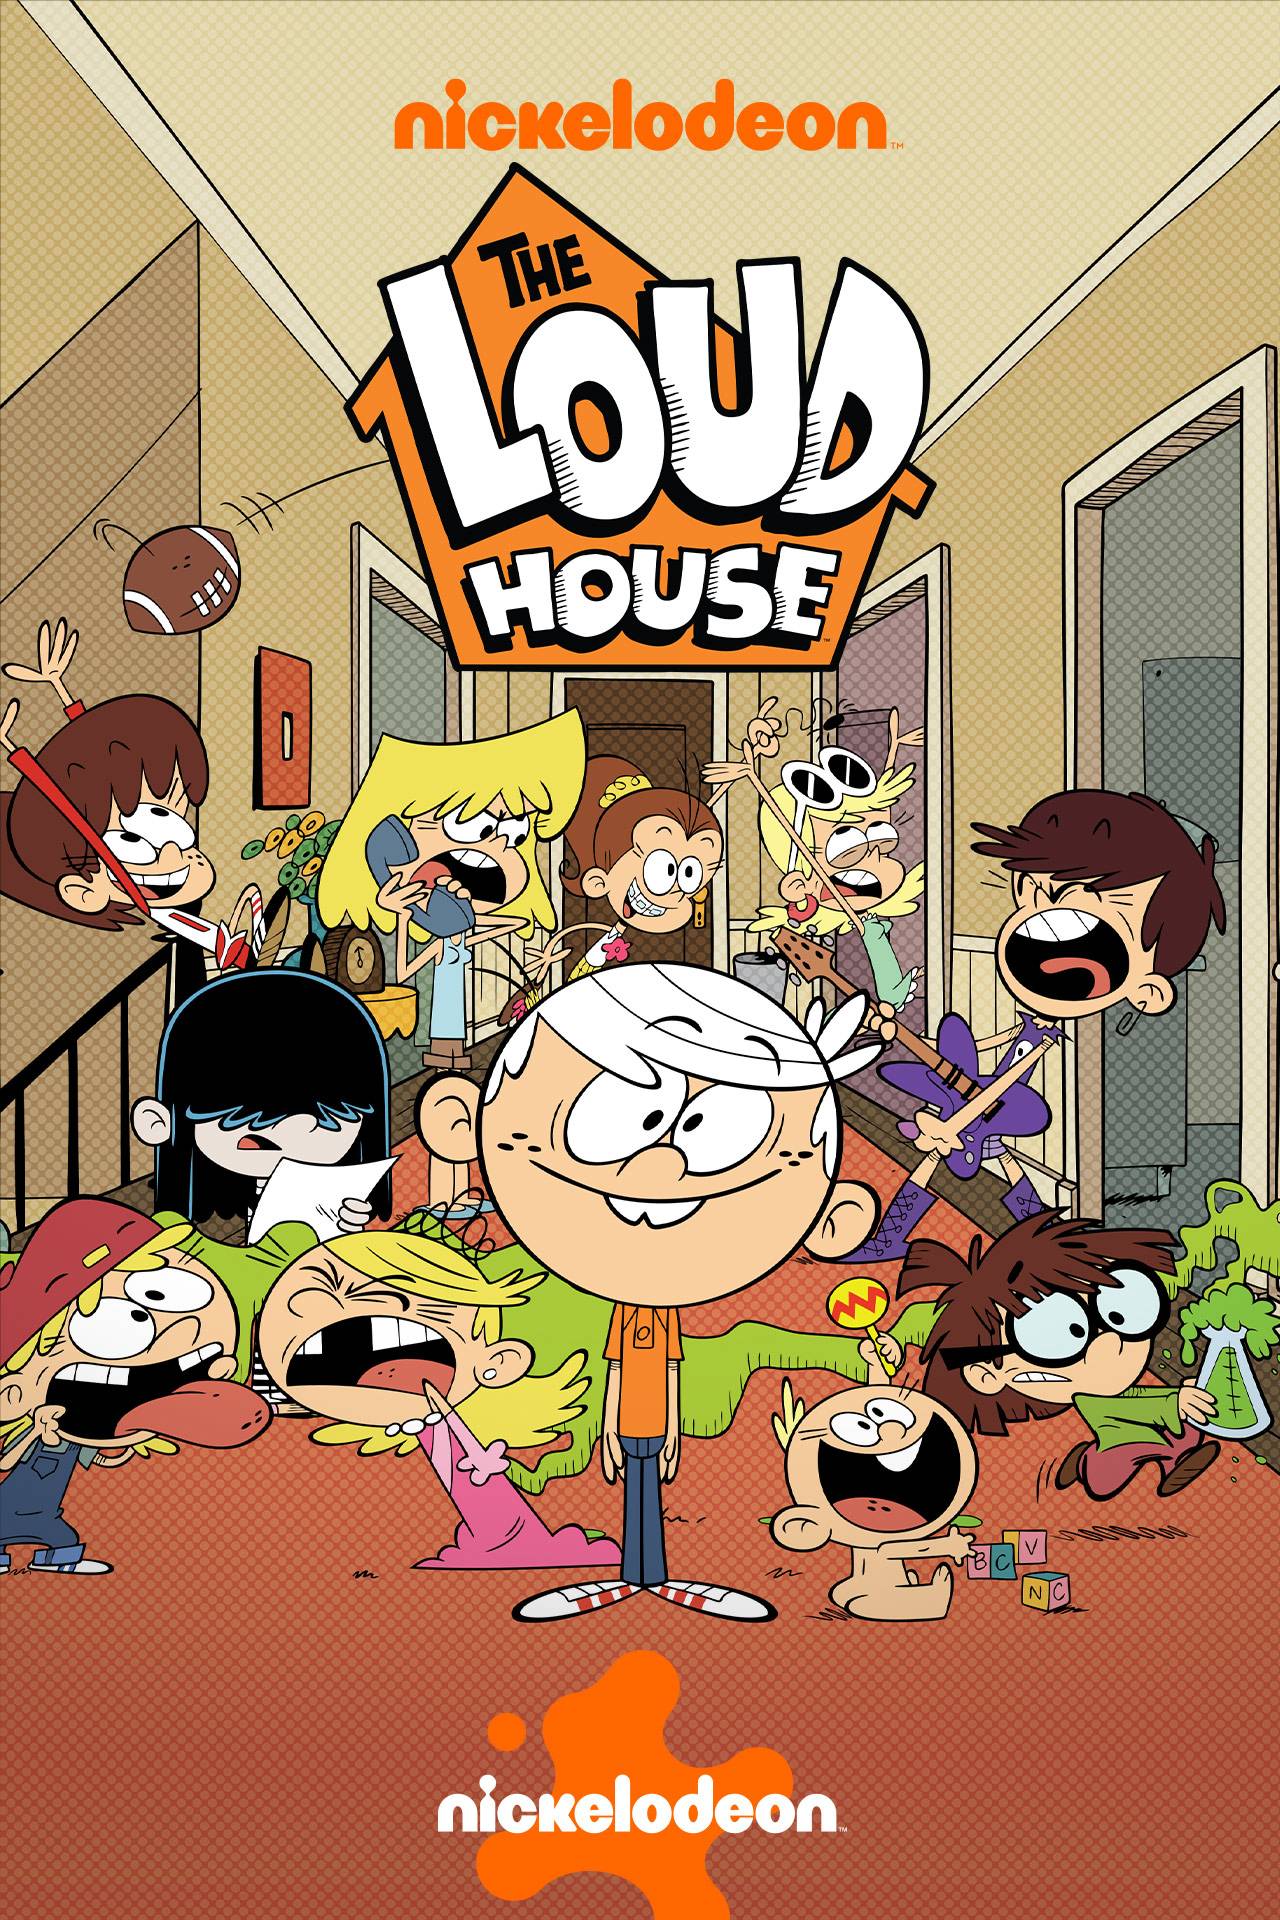 Best of Loud house pictures